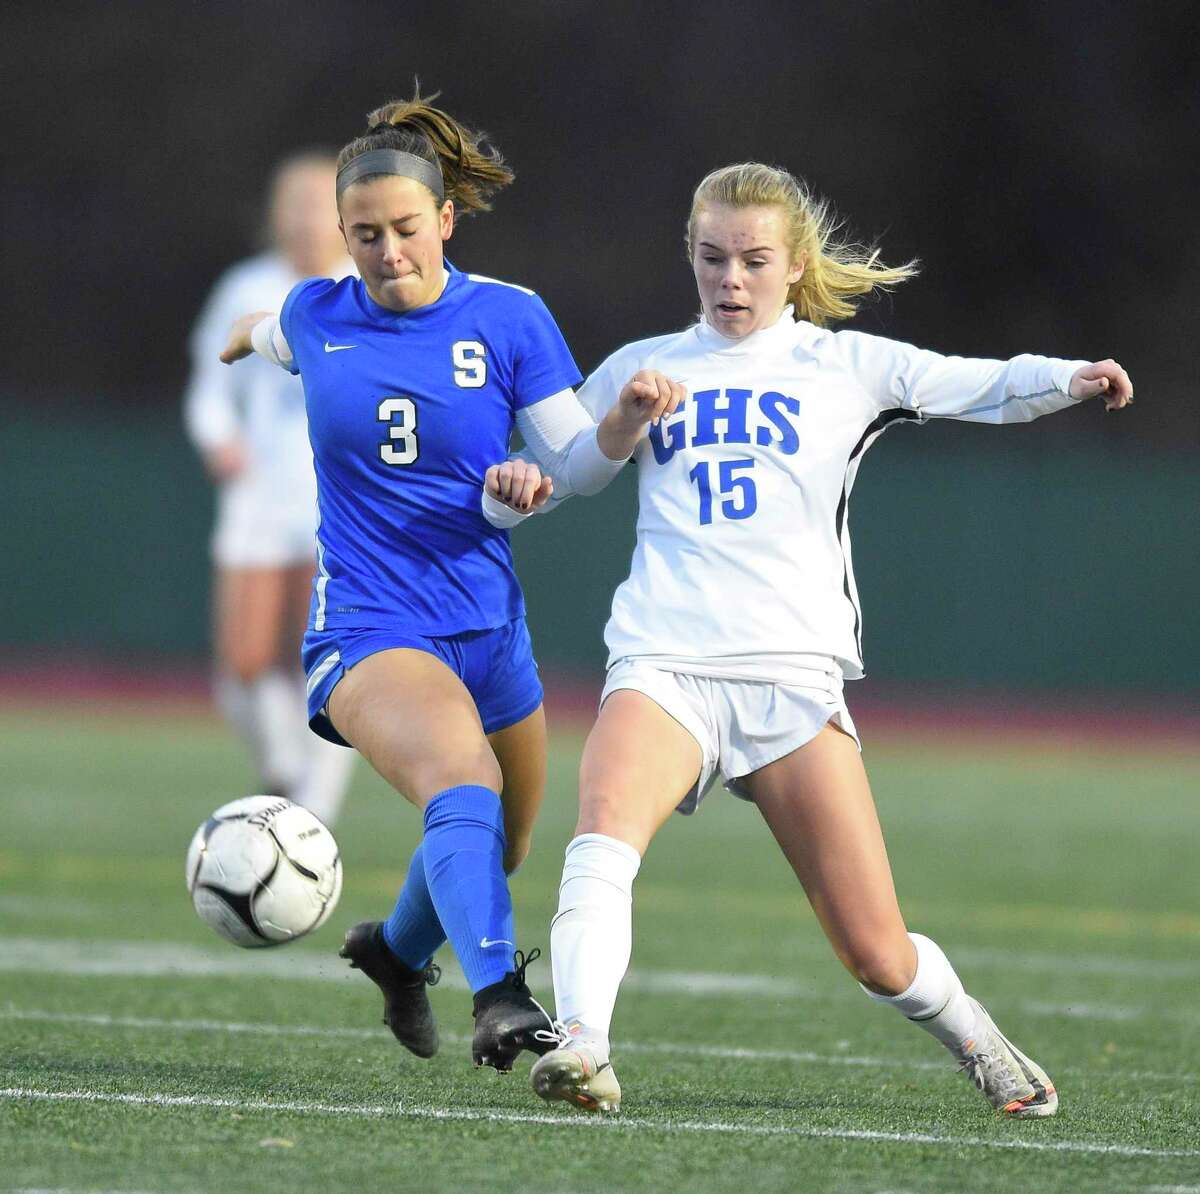 25 Ciac Girls Soccer Players To Watch For The 2021 Season 